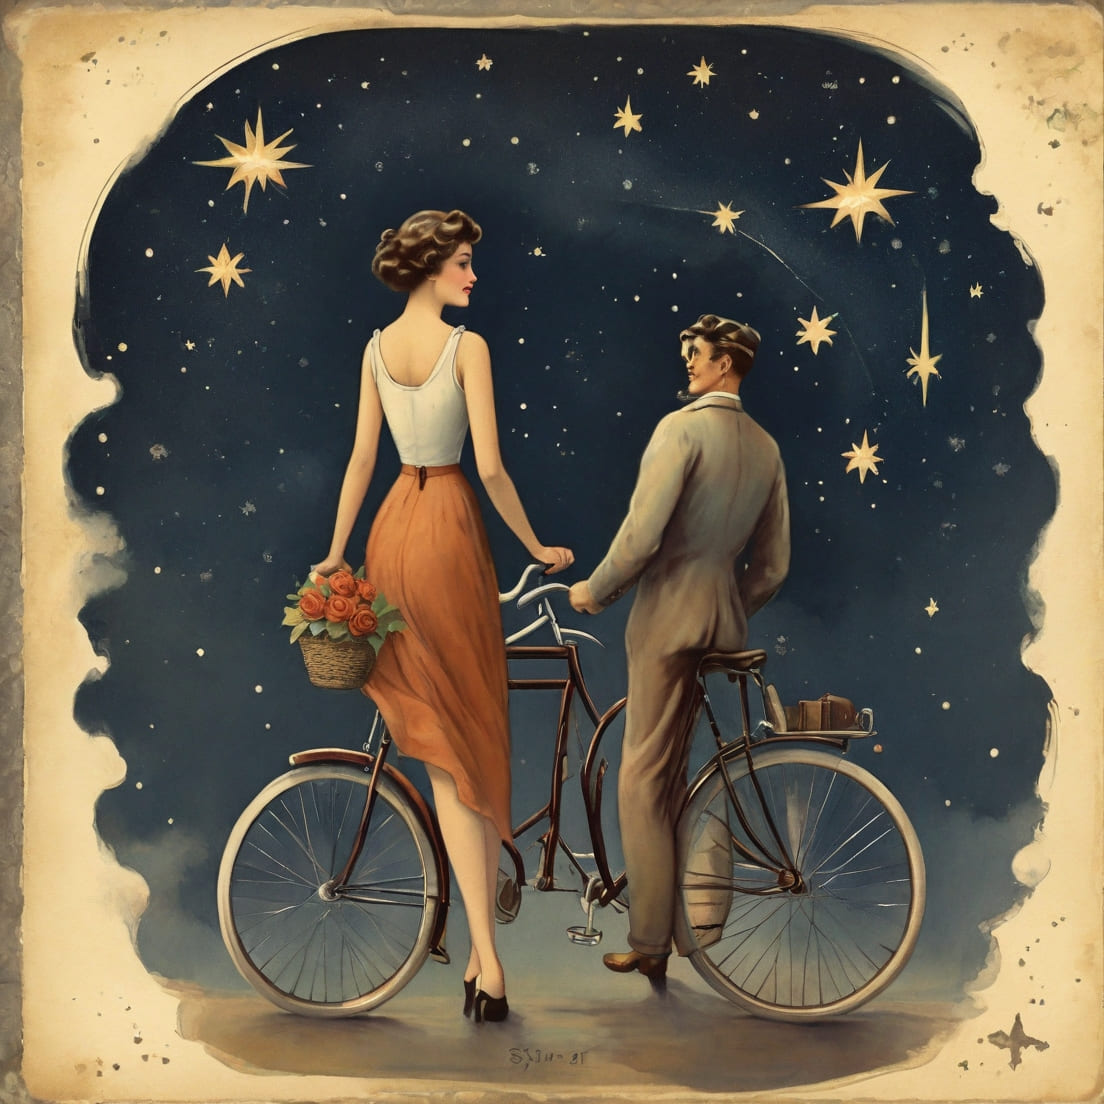 postcard, vintage style, bicycle, man, woman, stars preview image.